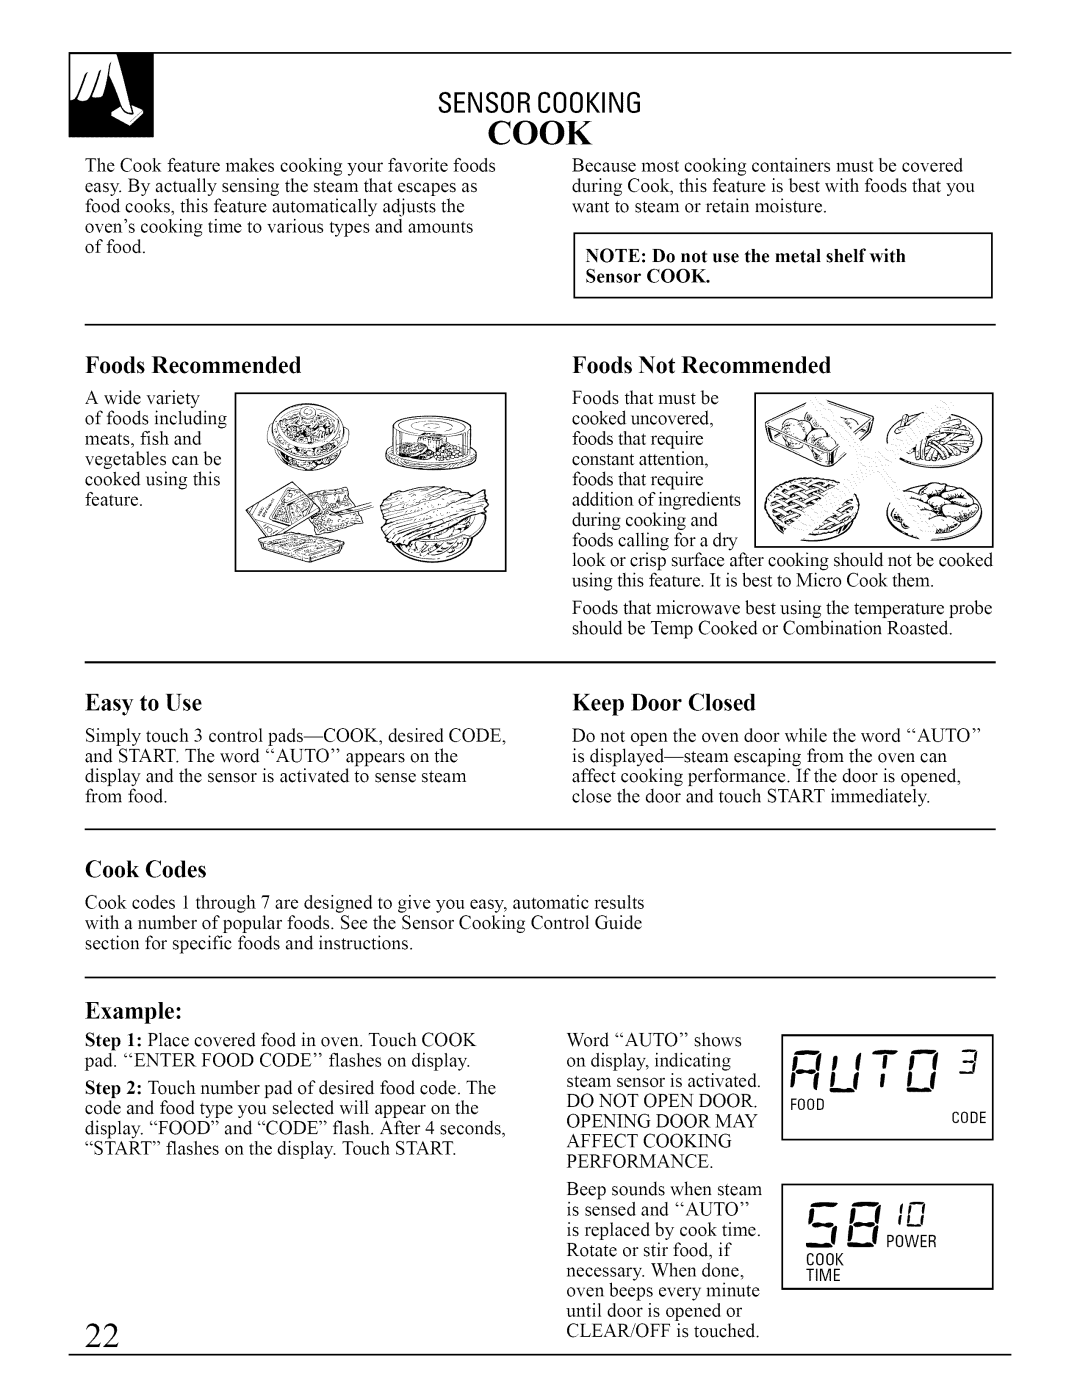 GE JVM290 manual It, Easy to Use, Cook Codes, Sensorcooking, IIUaL, Foods Recommended, Foods Not Recommended 